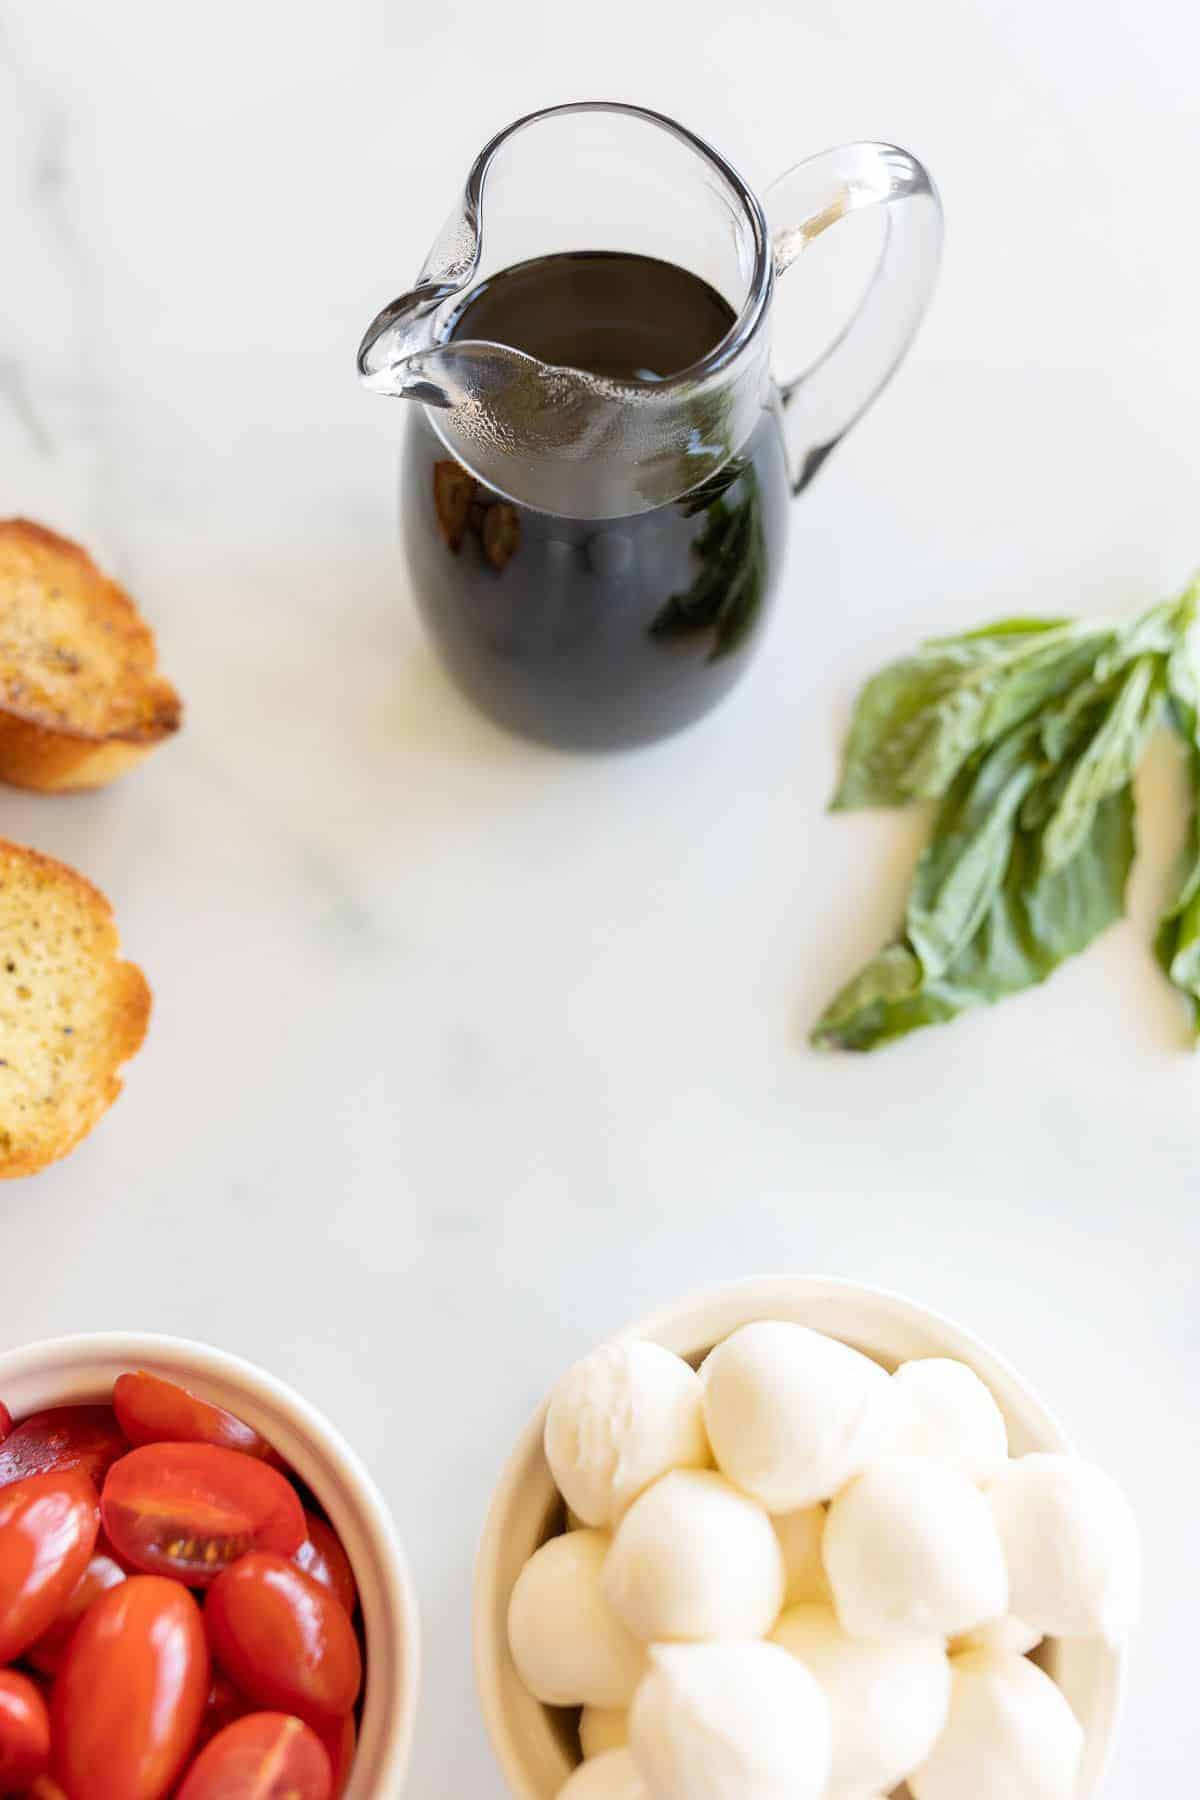 A small glass pitcher full of balsamic reduction, and bruschetta ingredients laid out on a marble surface.